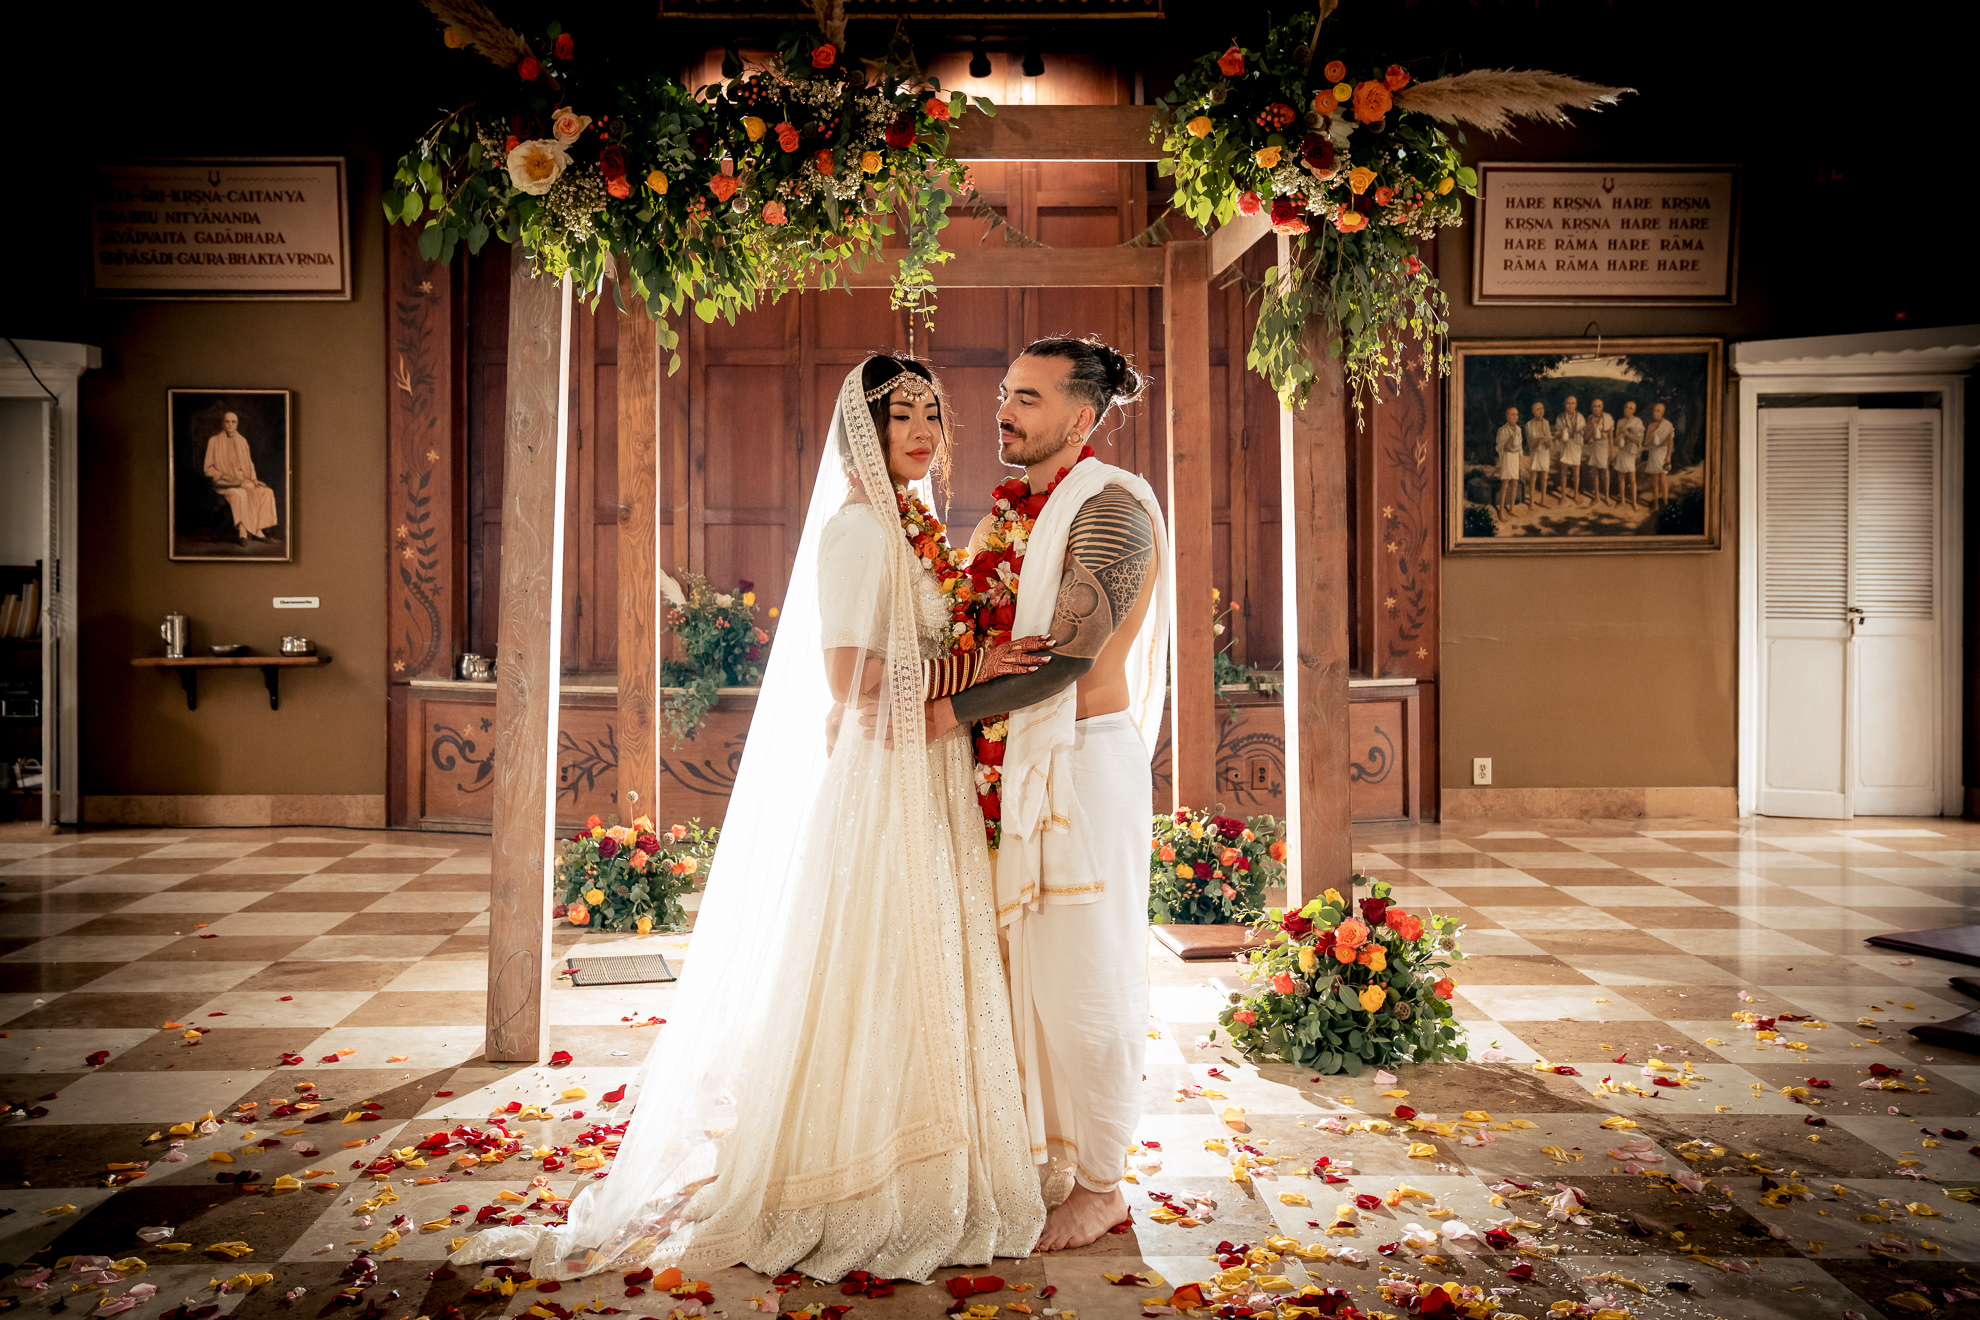 ThomasKim_photography A couple posing in front of a wedding arch, representing love and eternal union.